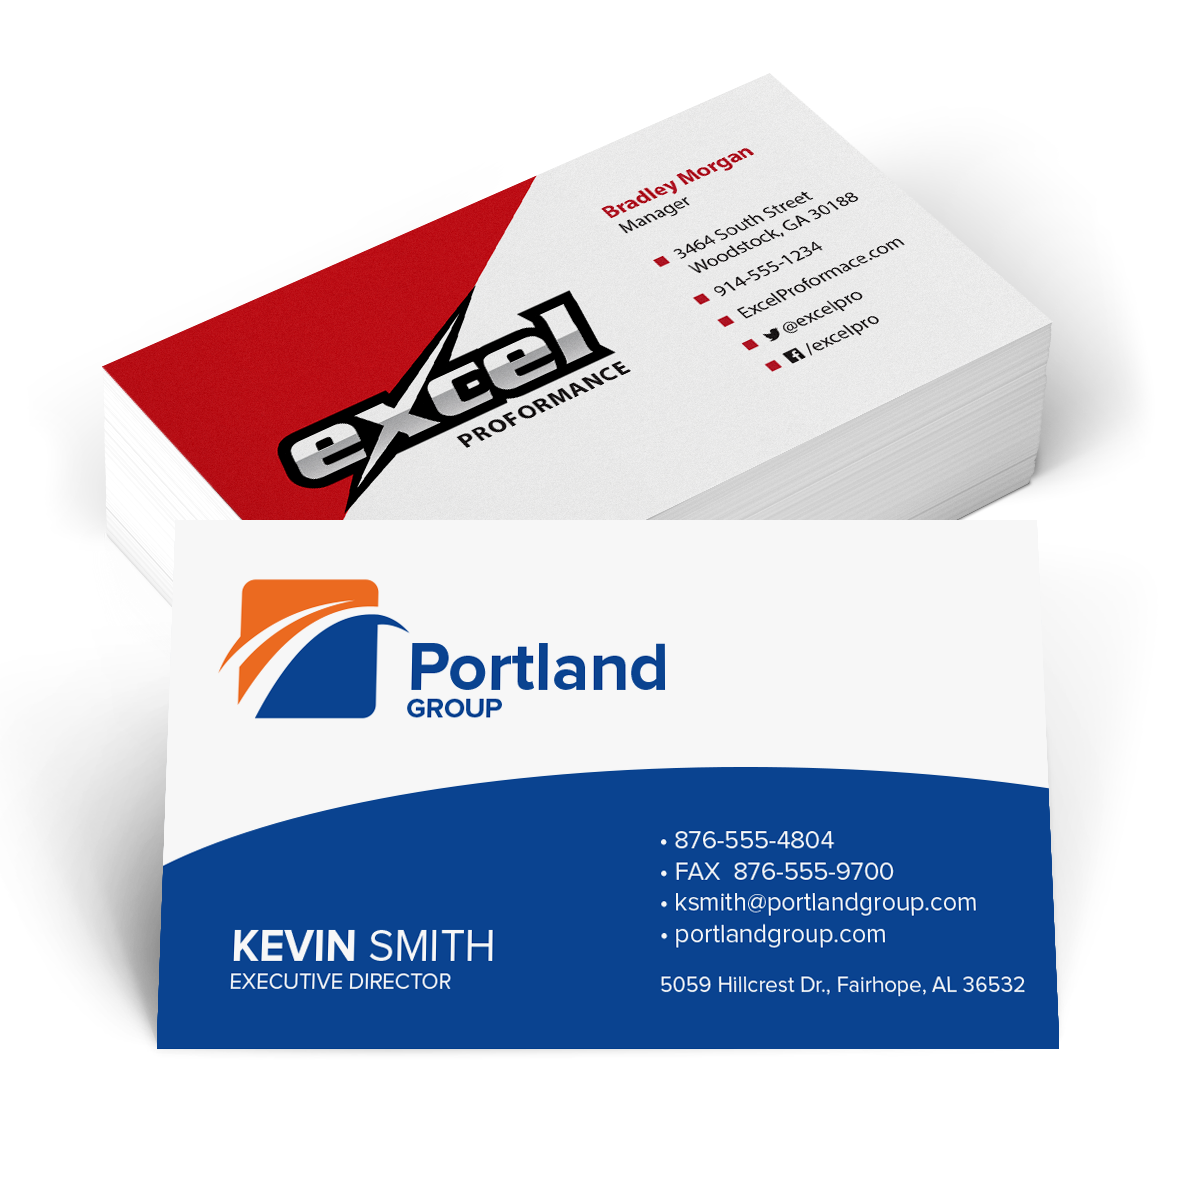 Download PNG image - Business Card PNG Photos 